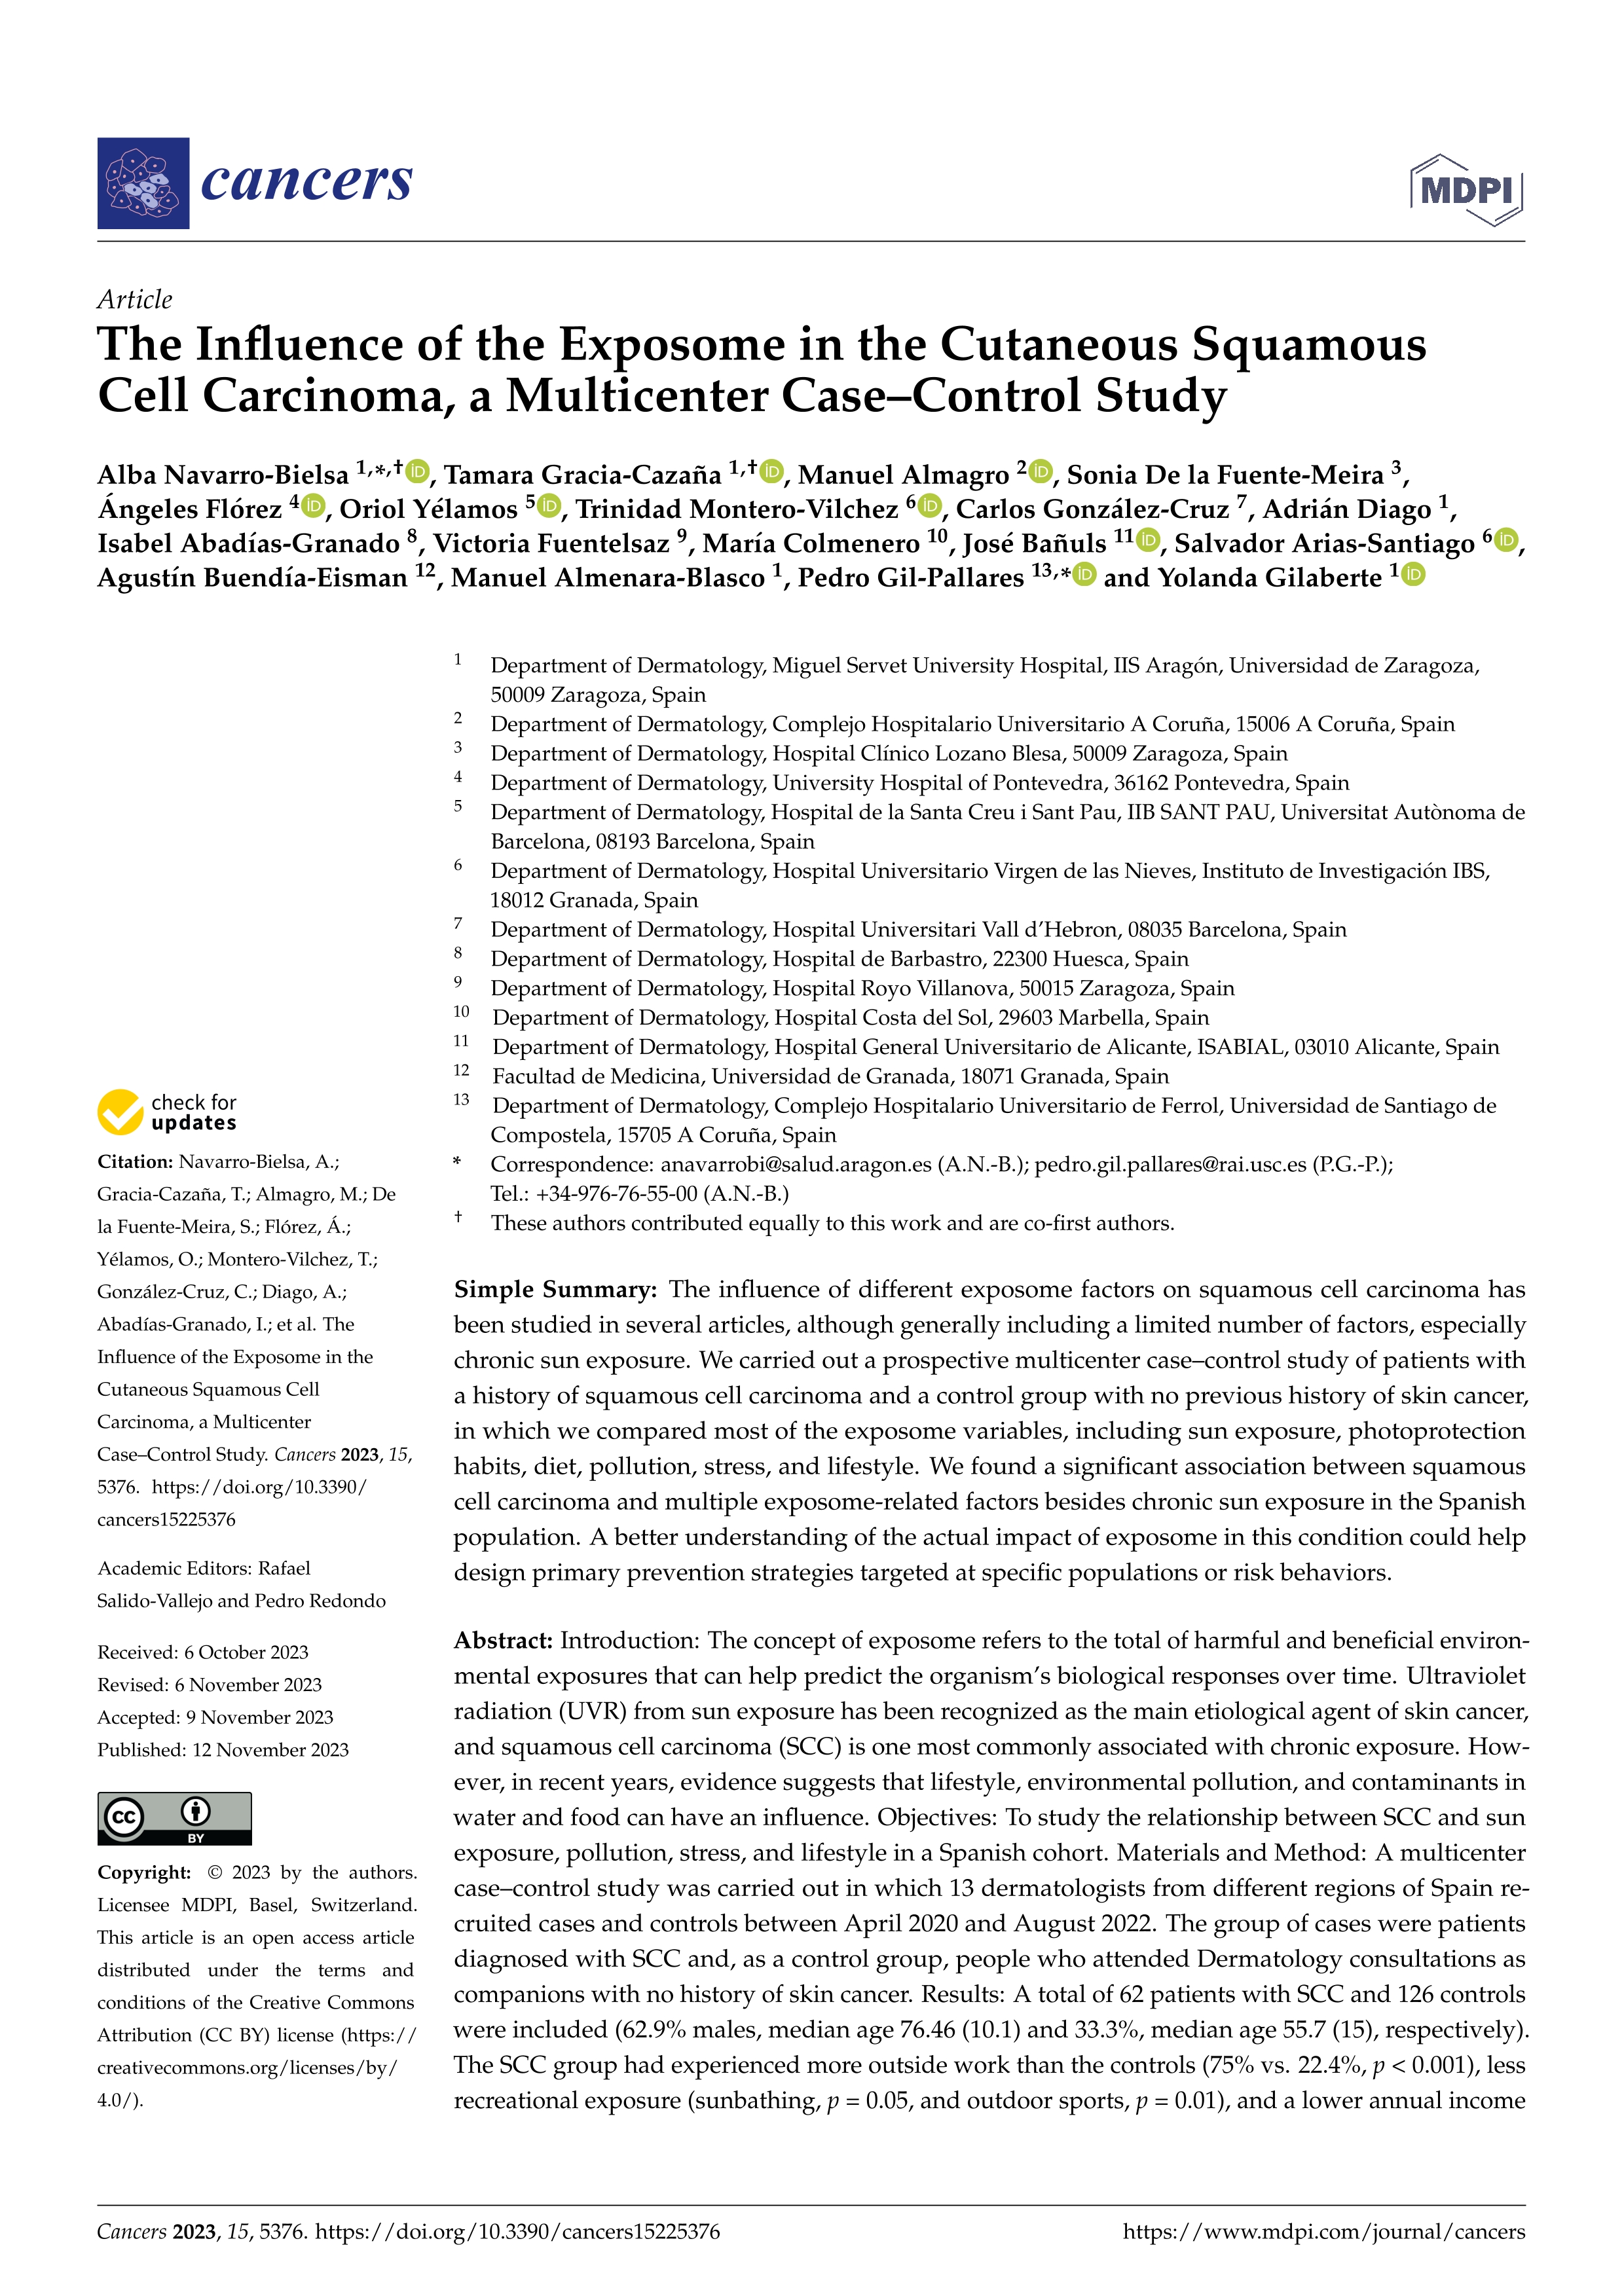 The influence of the exposome in the cutaneous squamous cell carcinoma, a multicenter case–control study